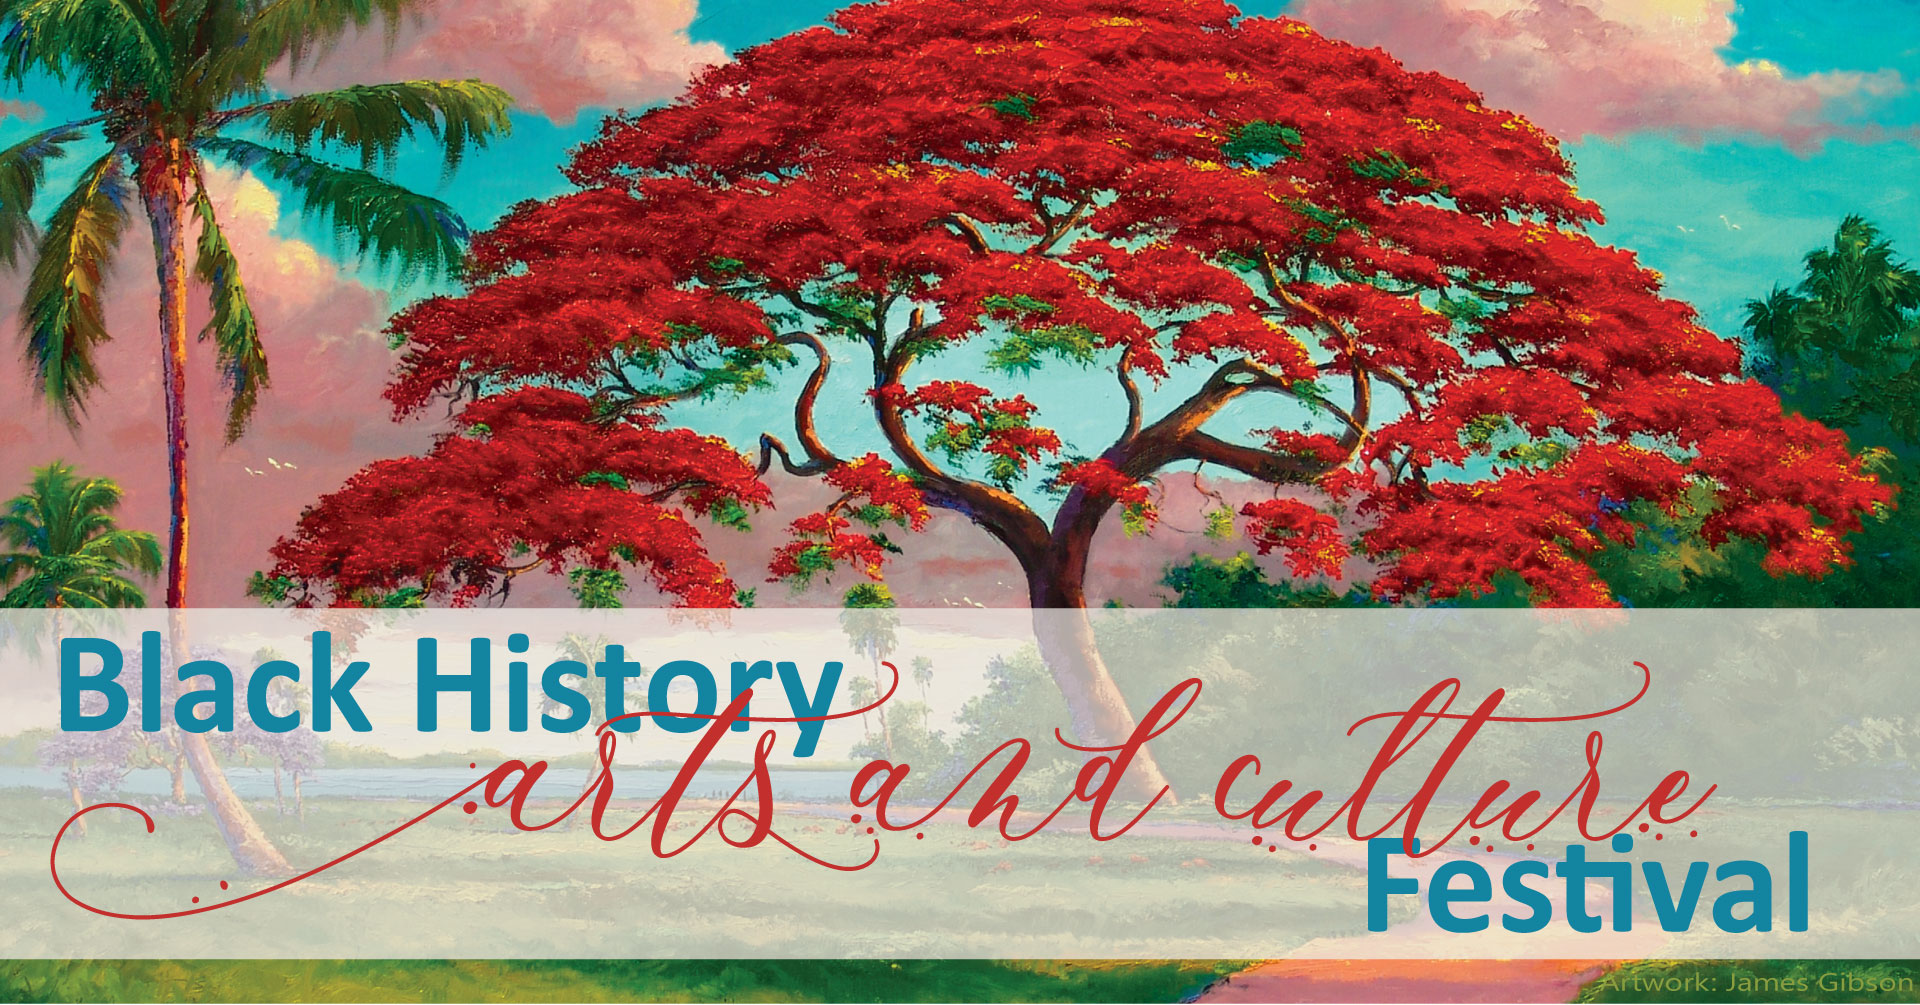 James Gibson Highwayman Painting of a Royal Poinciana Tree. There is a banner over the painting that says, "Black History Arts and Culture Festival"